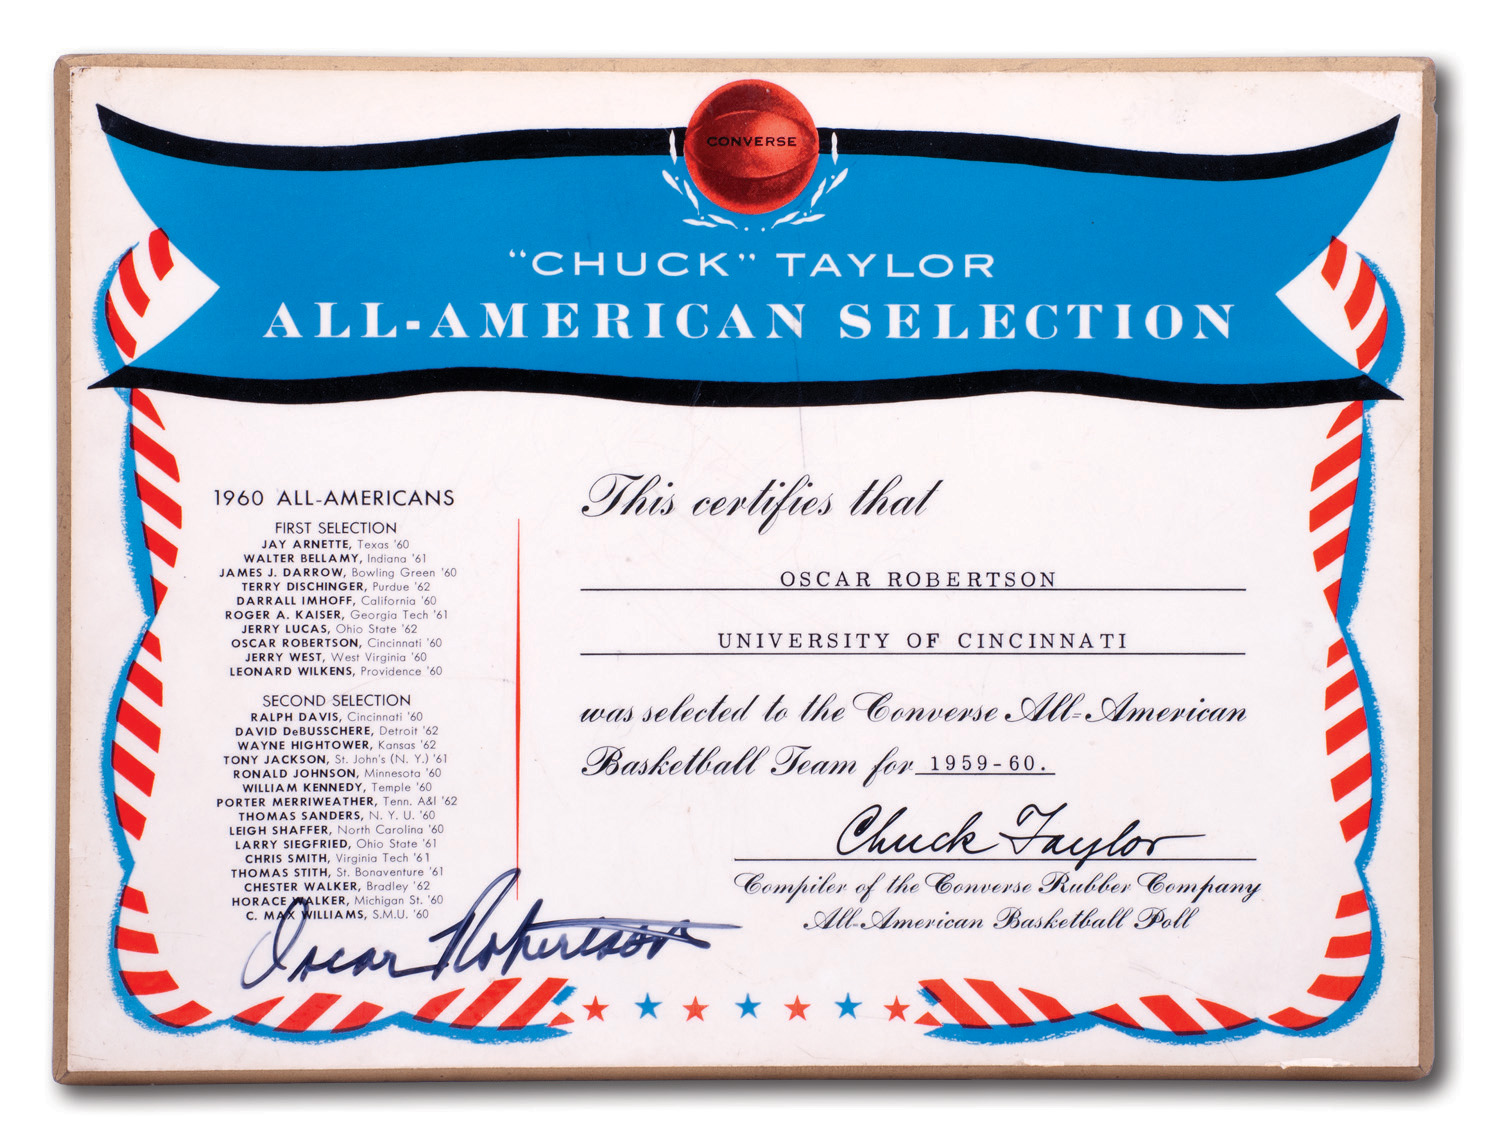 Lot Detail - OSCAR ROBERTSON'S AUTOGRAPHED 1960 CHUCK TAYLOR CONVERSE ALL- AMERICAN BASKETBALL TEAM PLAQUE (ROBERTSON COLLECTION)